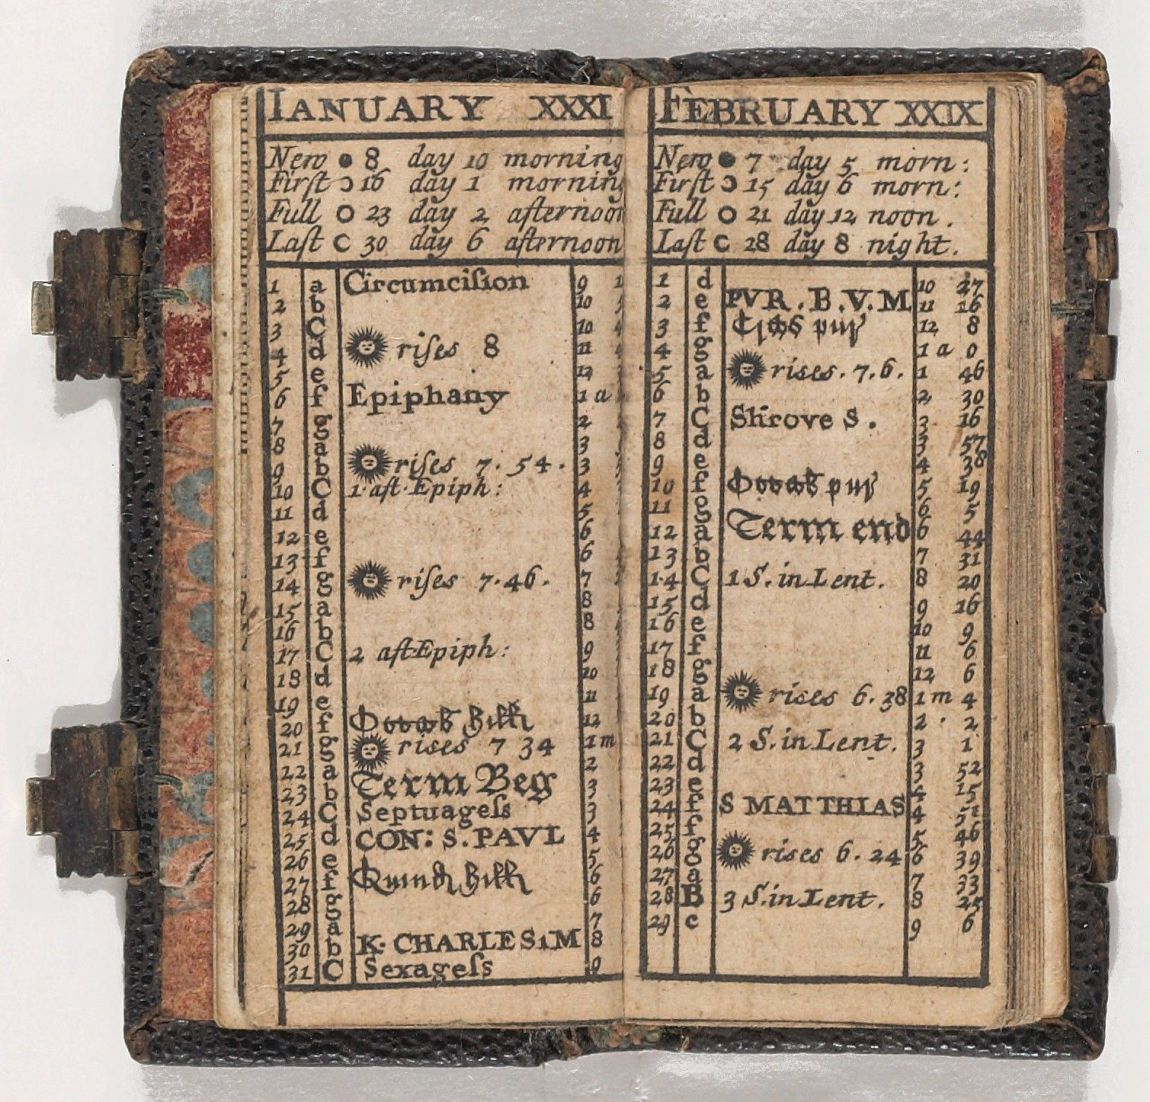 A pocket almanac open to the January and February pages